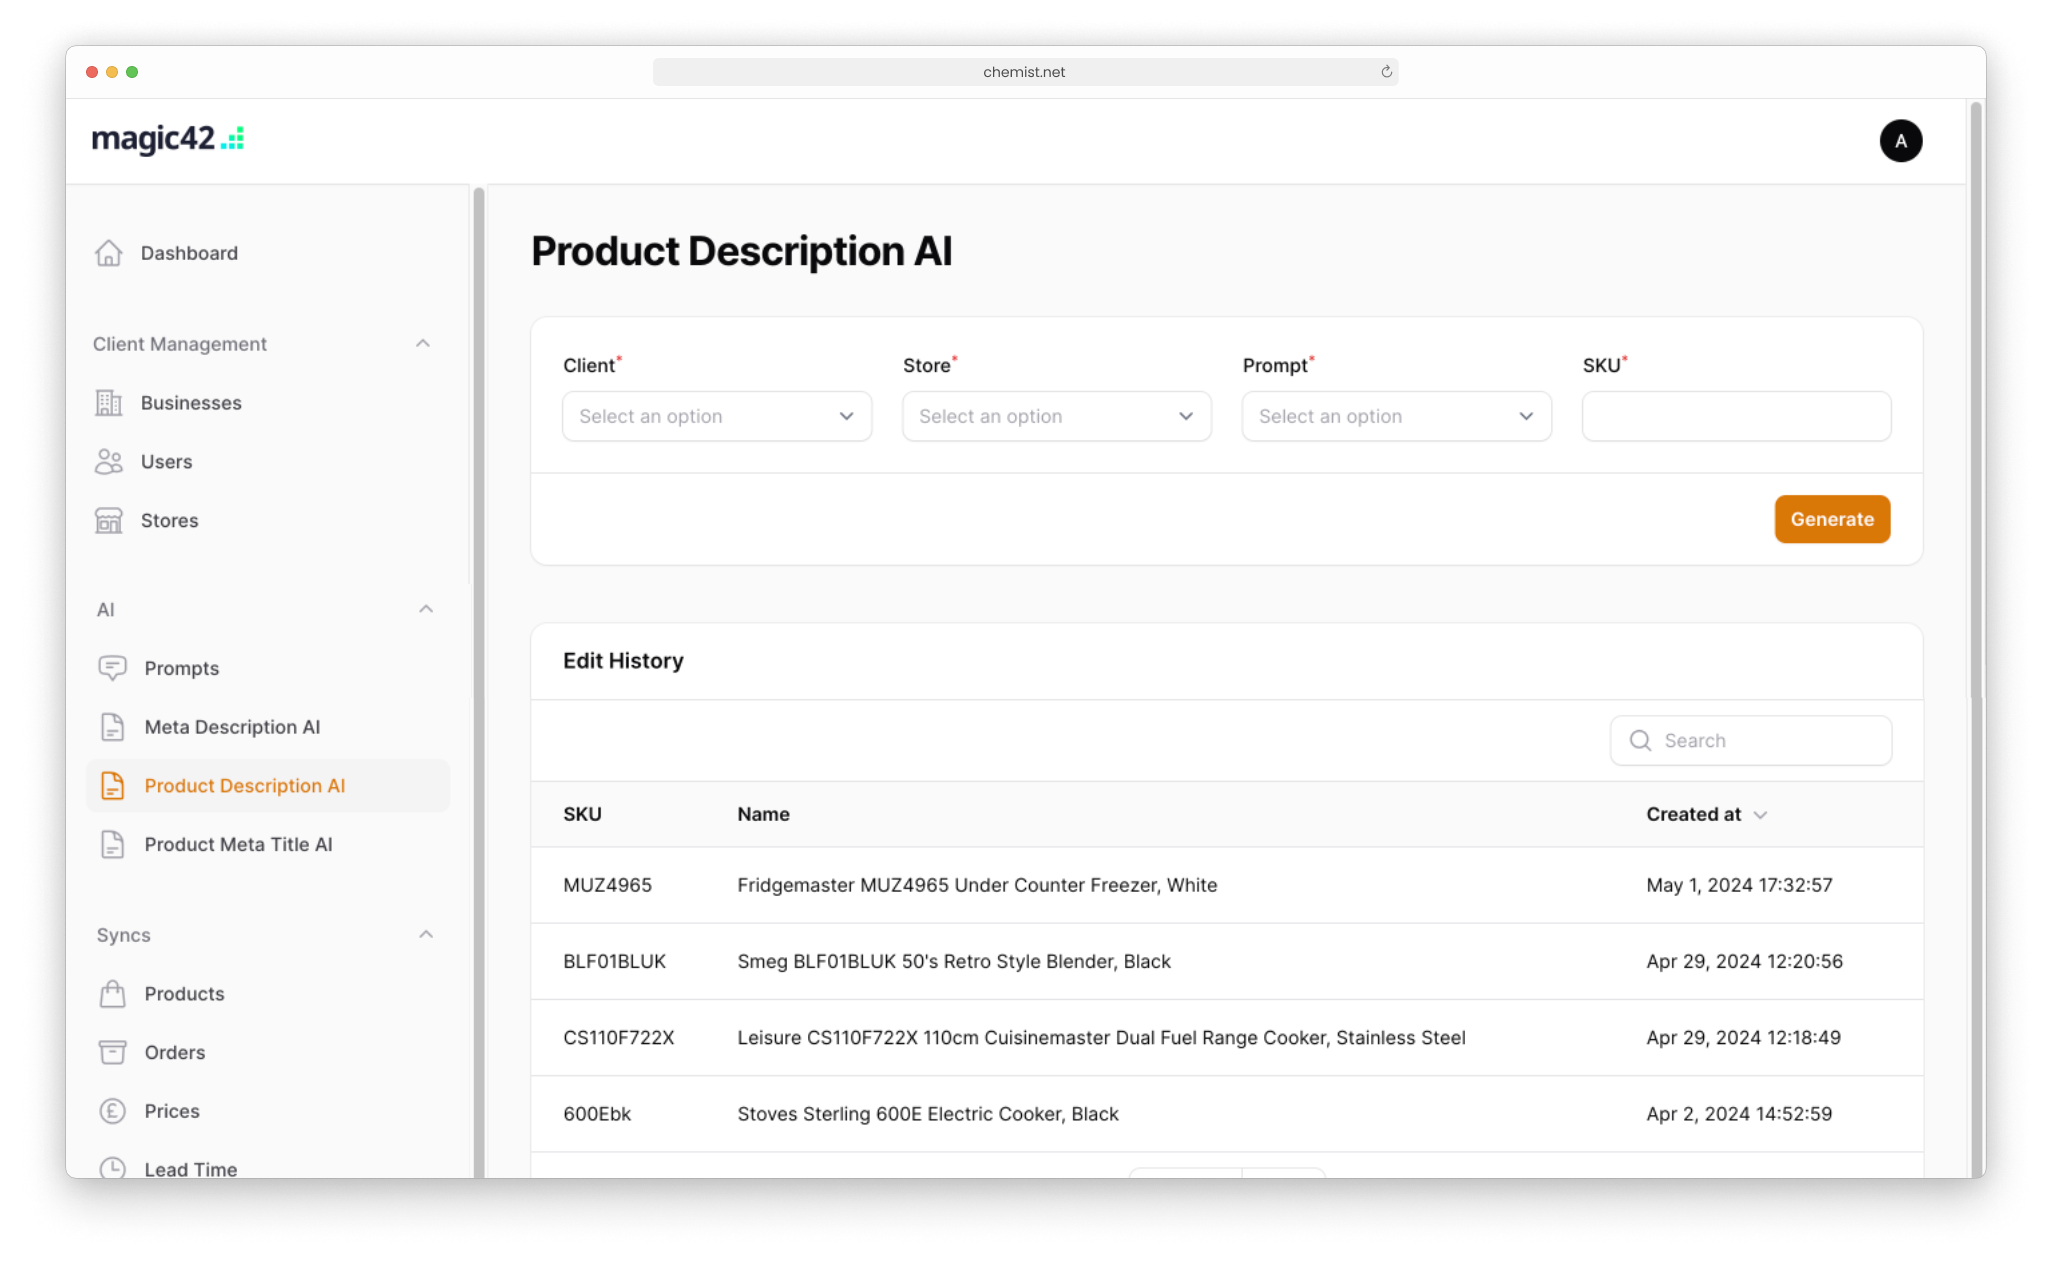 Shopify integrations to ERPs, WMS and AI product description feature using magic42's integrations app, shown here on its admin panel